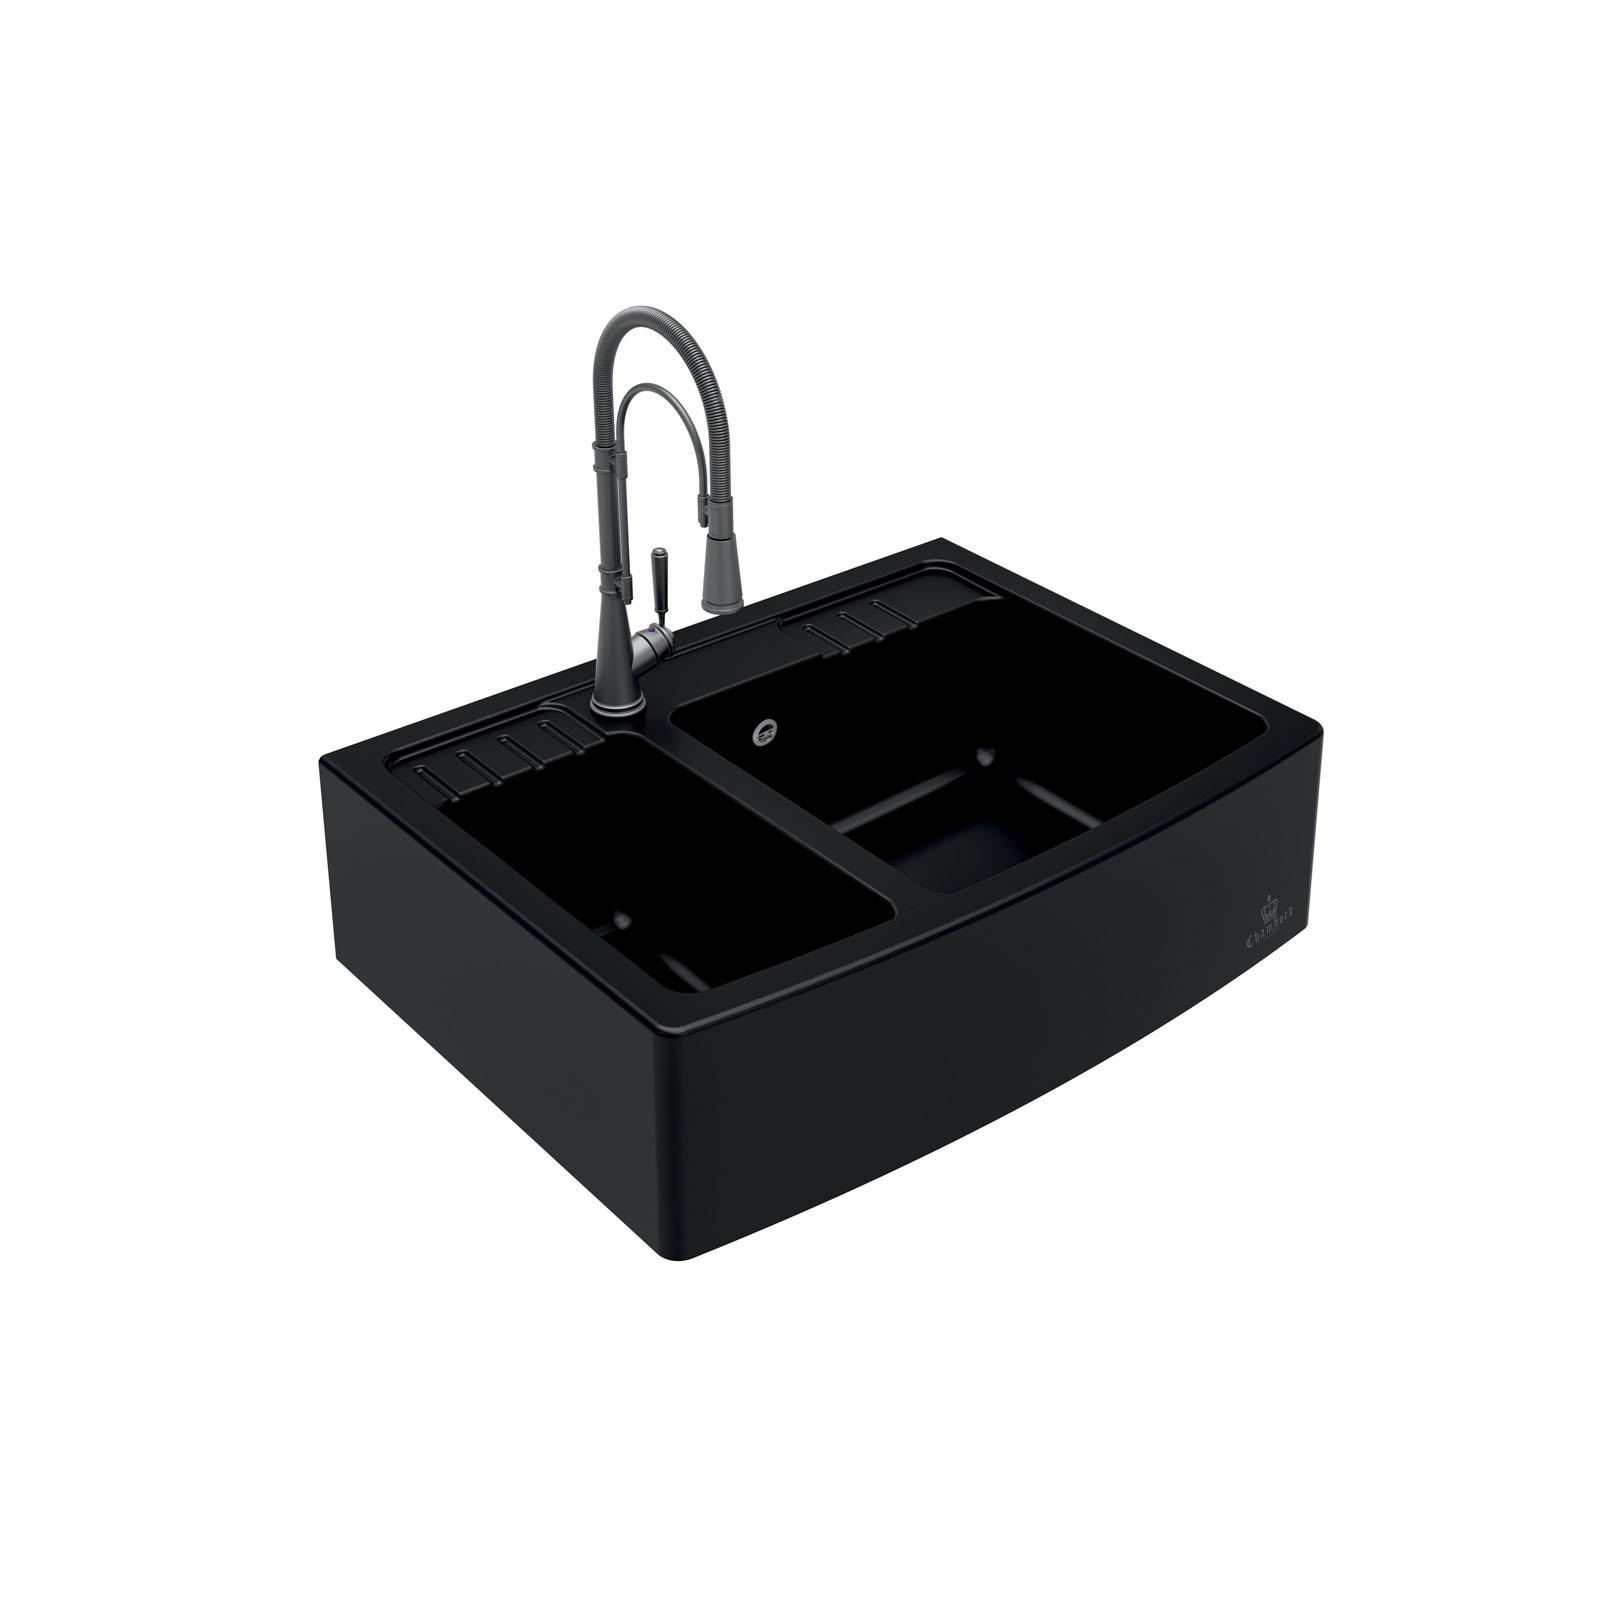 High-quality sink Clotaire III granit black - one and a half bowl